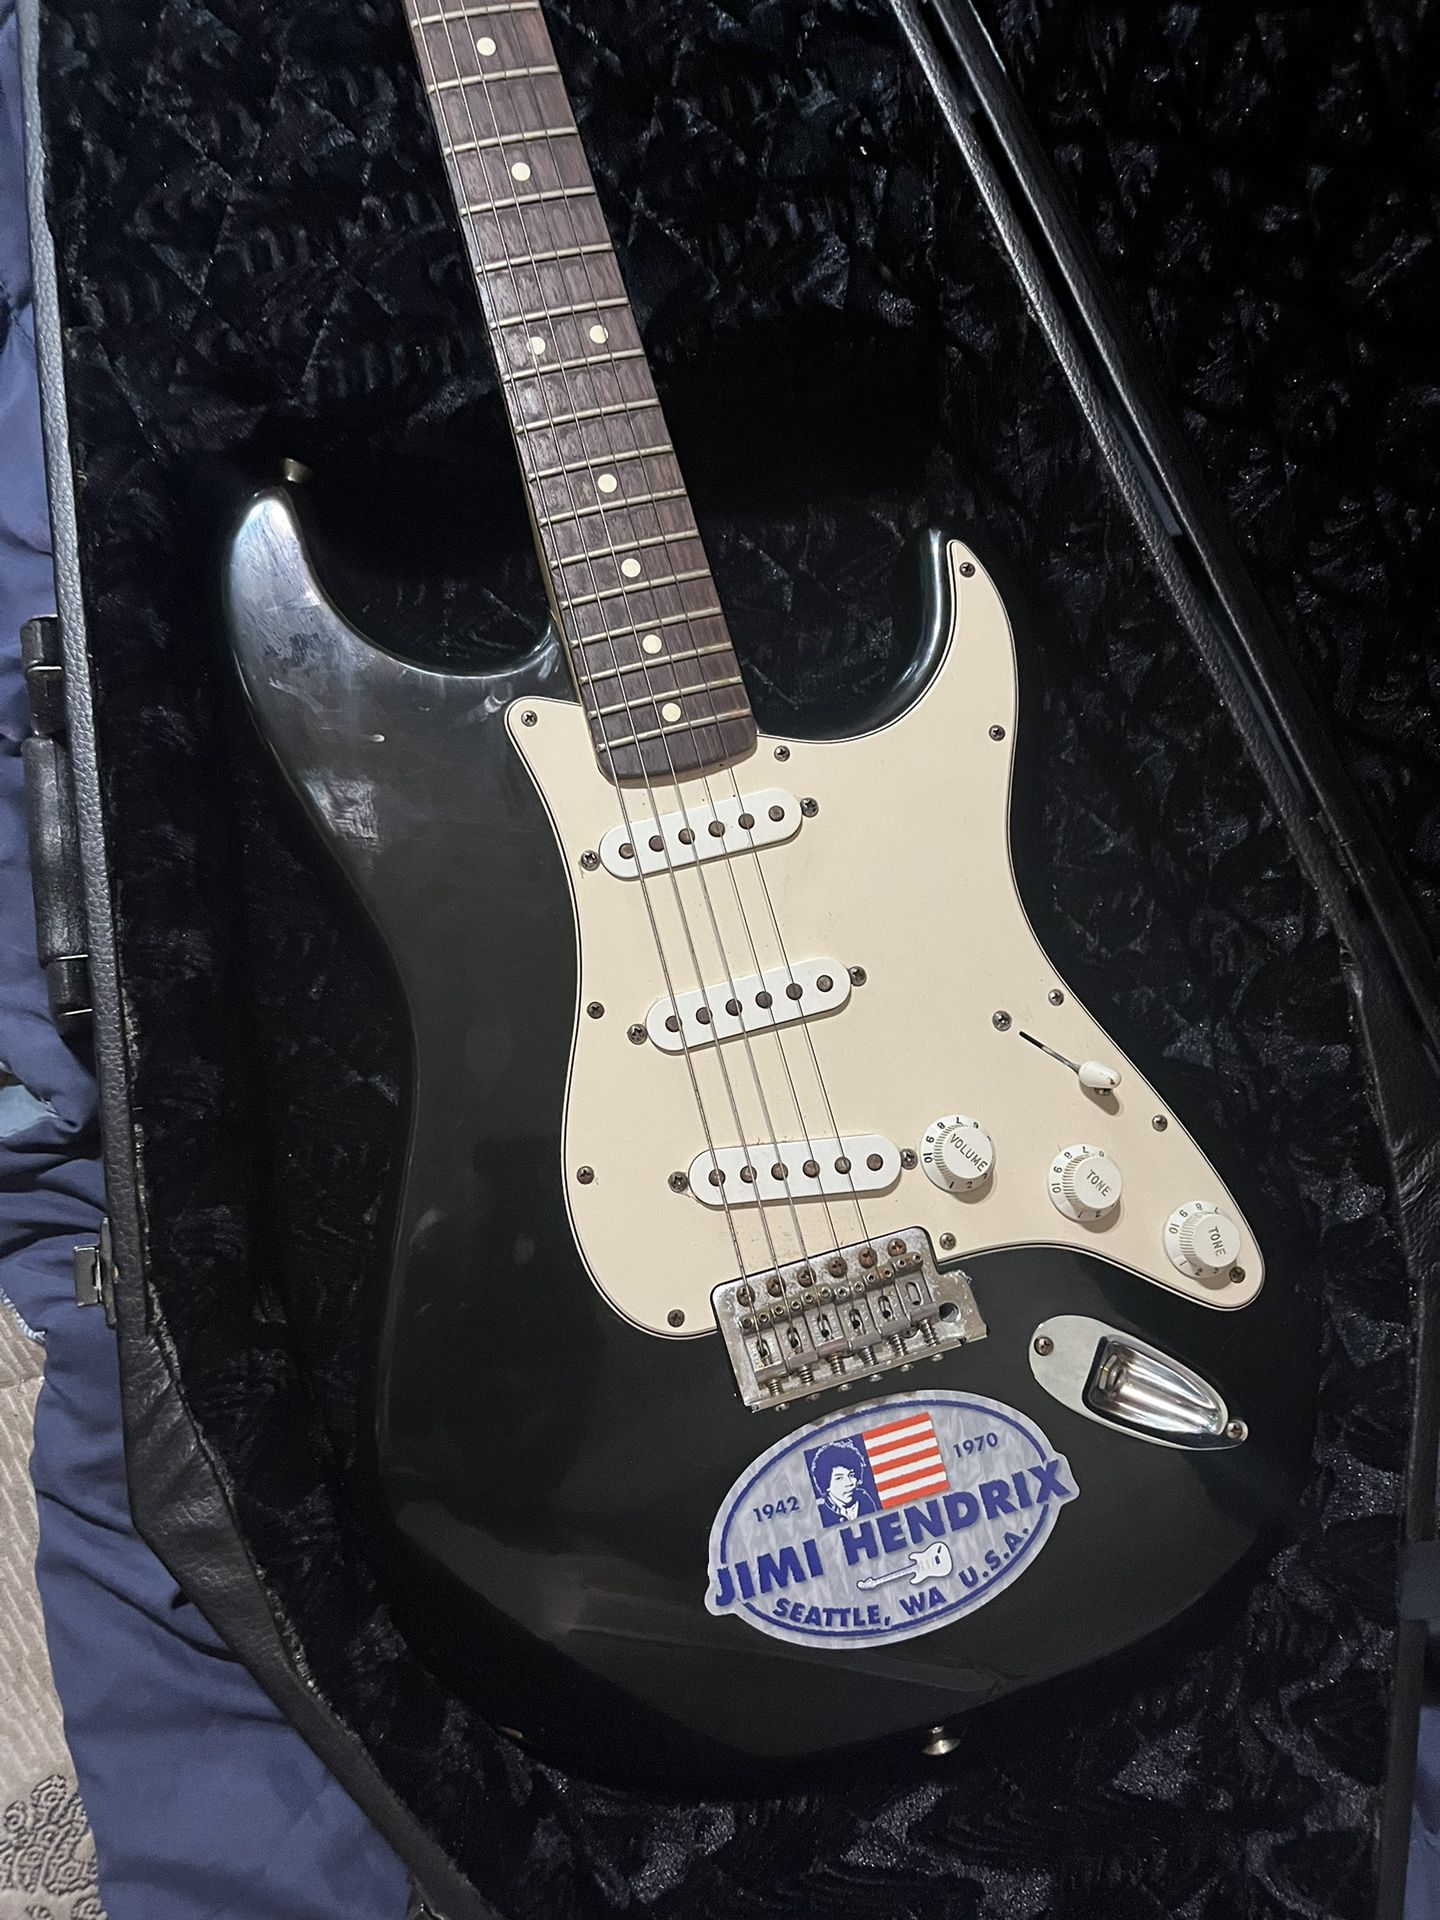 ELECTRIC GUITAR: FENDER MODEL STRATOCASTER (MEXICO), SERIAL NUMBER MZ, FENDER STRATOCASTER/ JIMI HENDRIX STICKER/MISSING 1 STRING/WITH COFFIN C